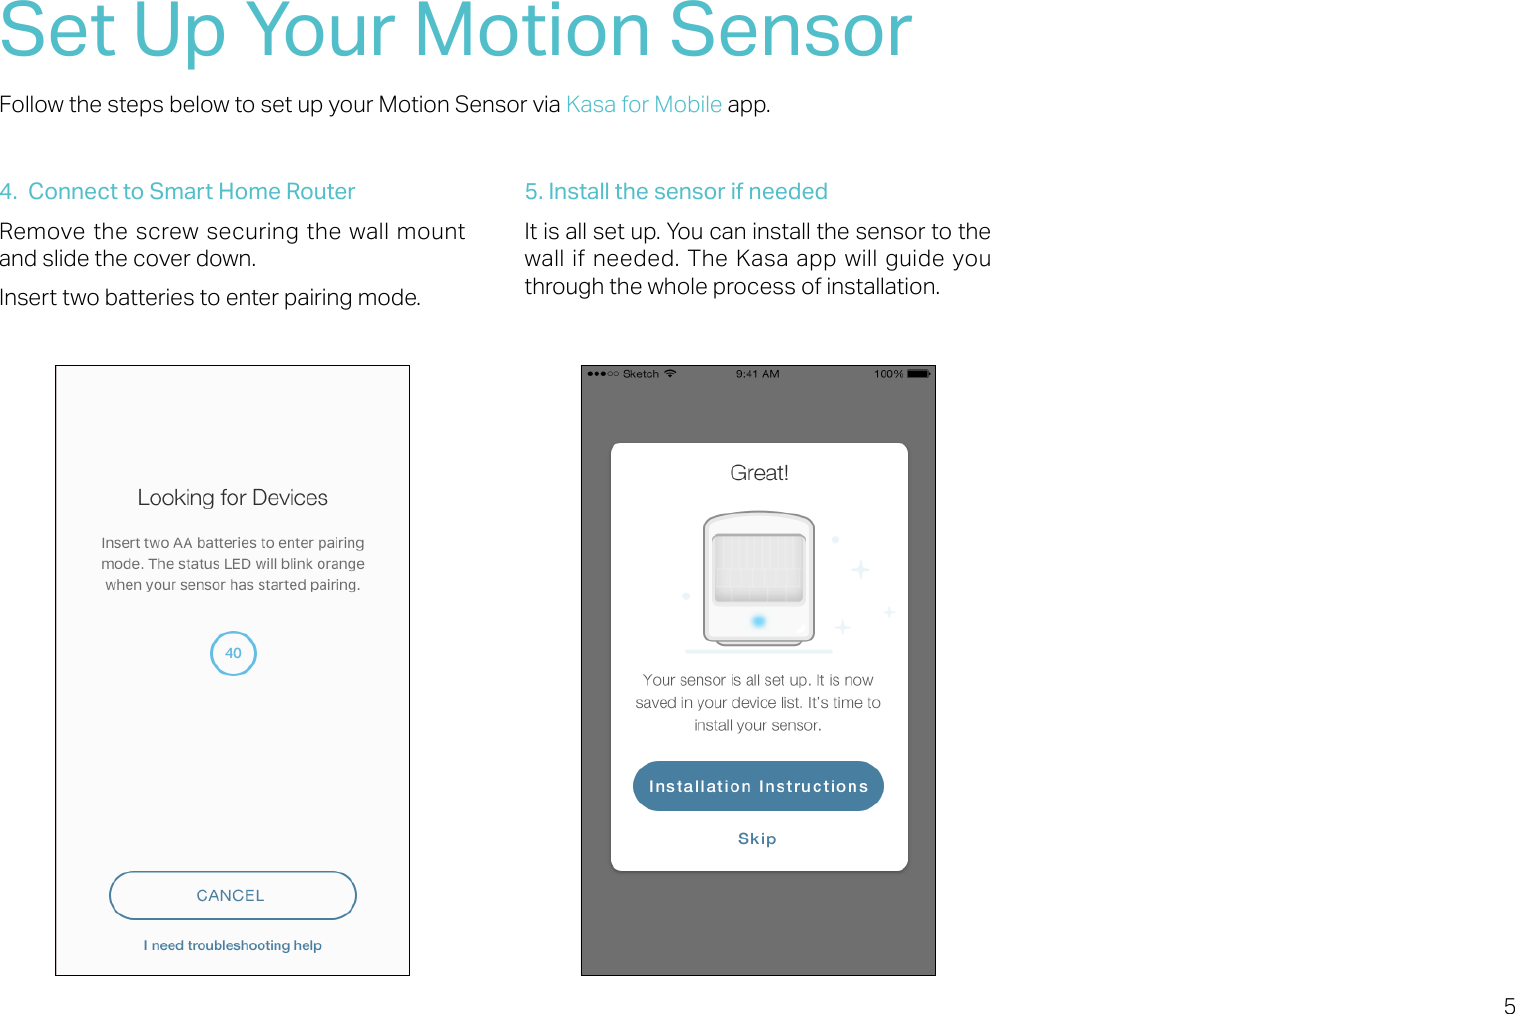 5Set Up Your Motion SensorFollow the steps below to set up your Motion Sensor via Kasa for Mobile app.4.  Connect to Smart Home RouterRemove the screw securing the wall mount and slide the cover down.Insert two batteries to enter pairing mode. 5. Install the sensor if neededIt is all set up. You can install the sensor to the wall if needed. The Kasa app will guide you through the whole process of installation.